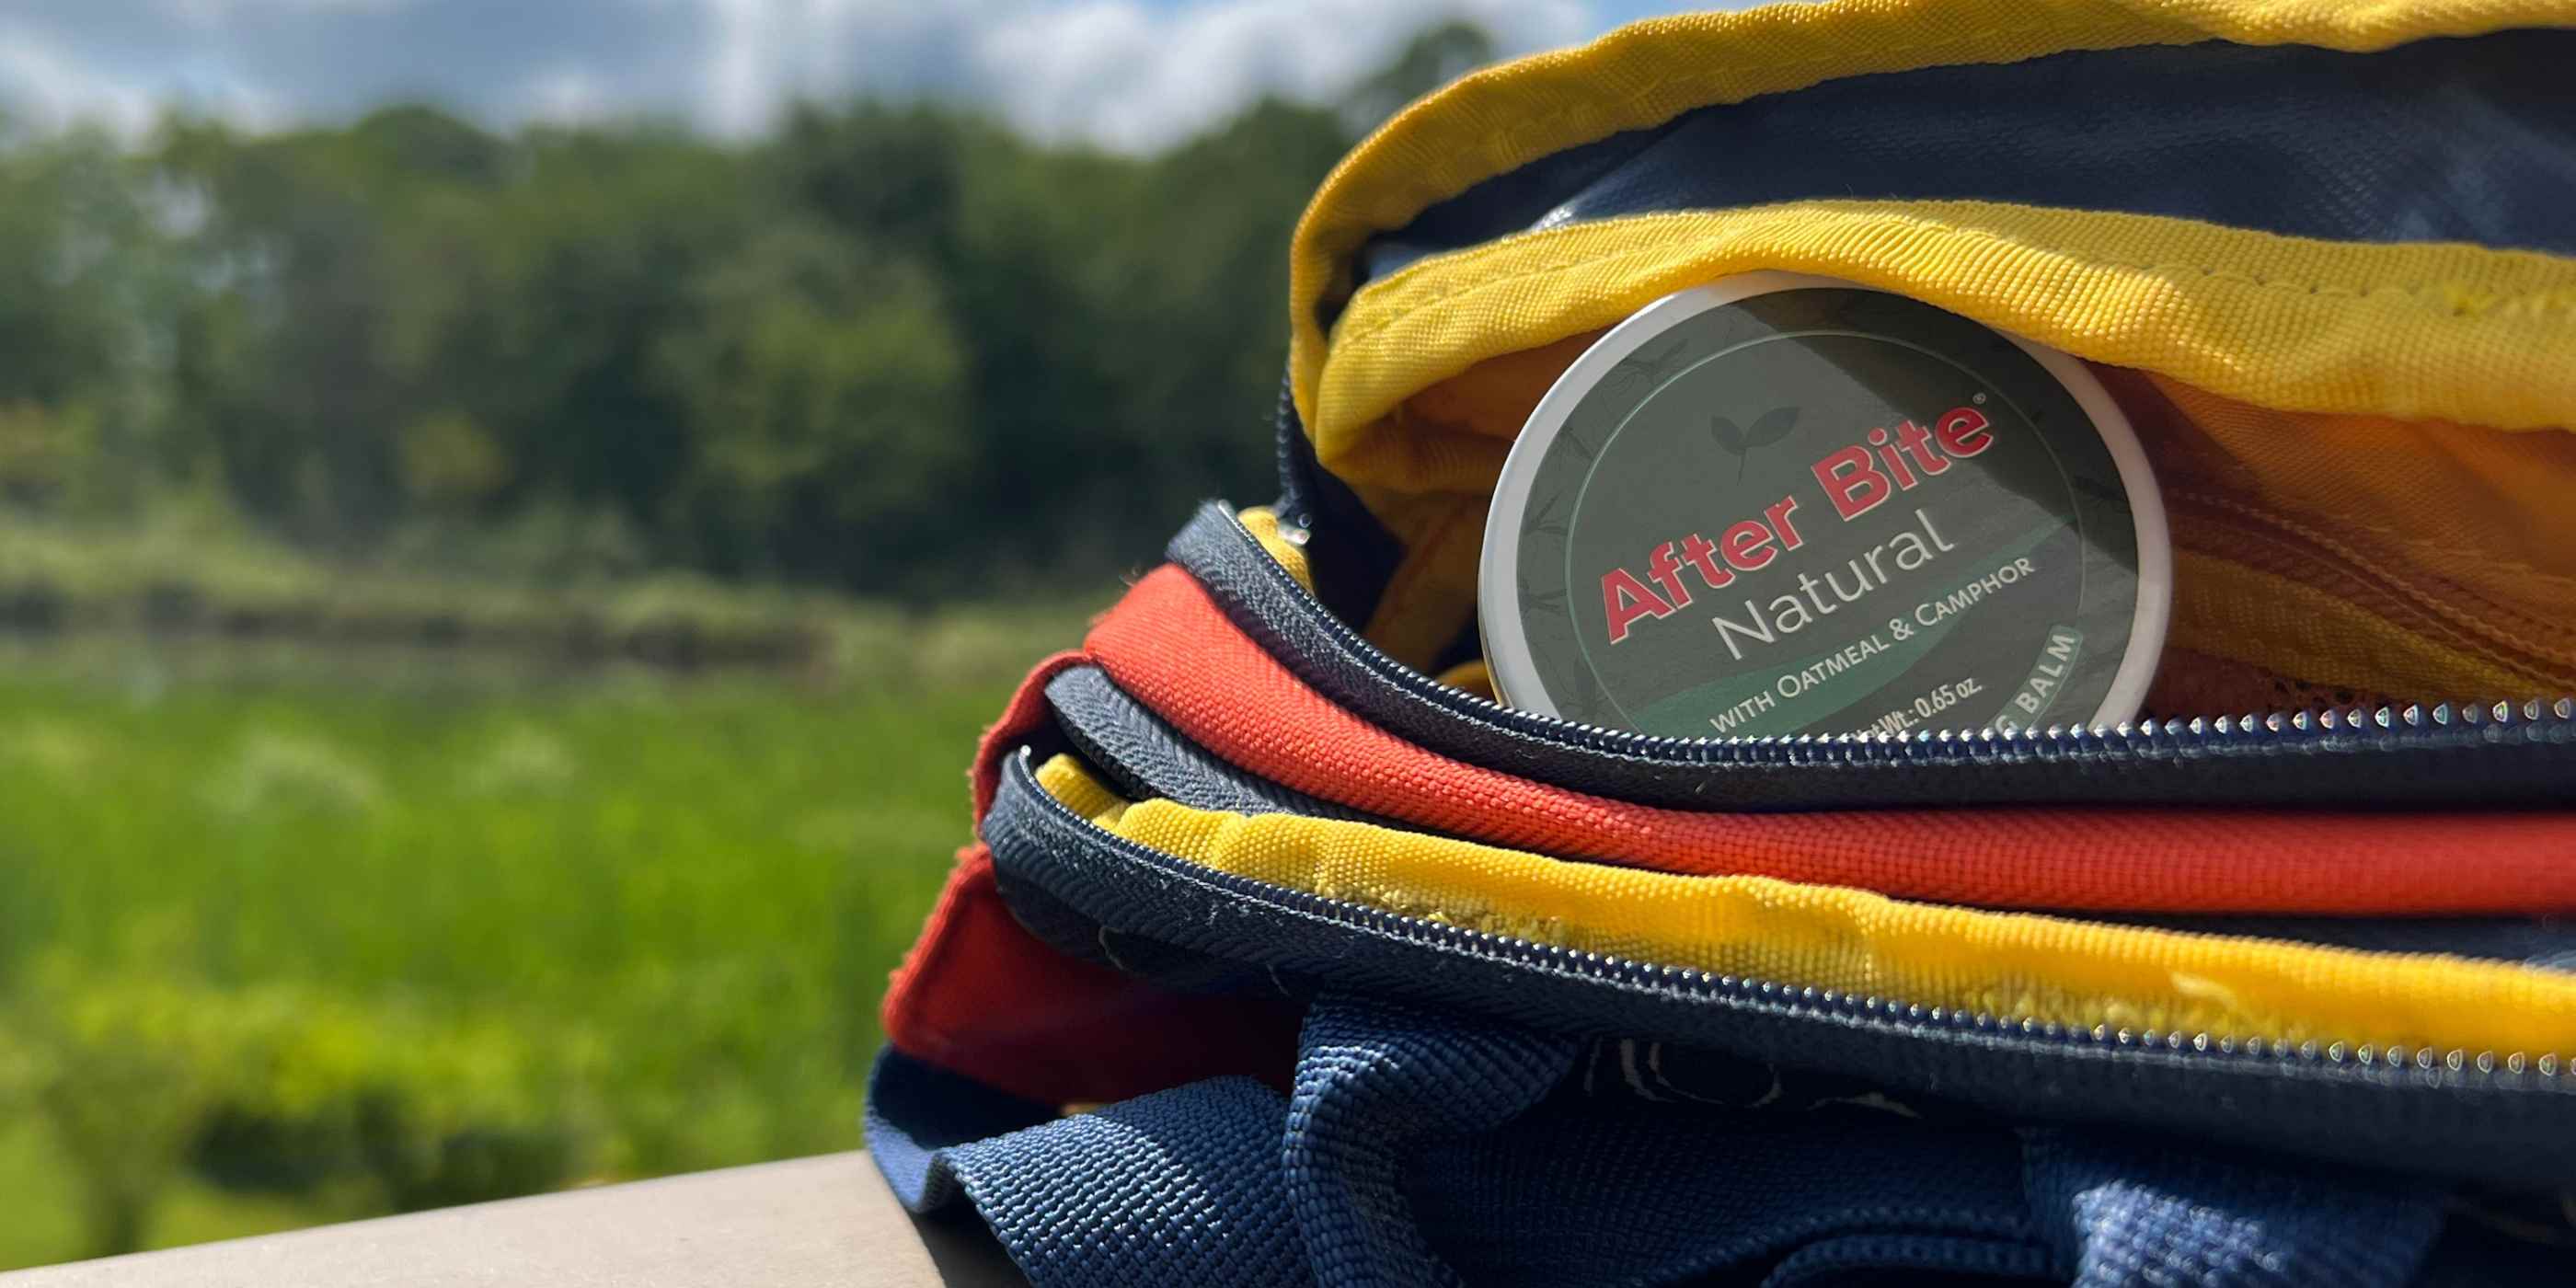 Tin of After Bite Natural peeking out of blue, red, and yellow backpack on a picnic table in summer